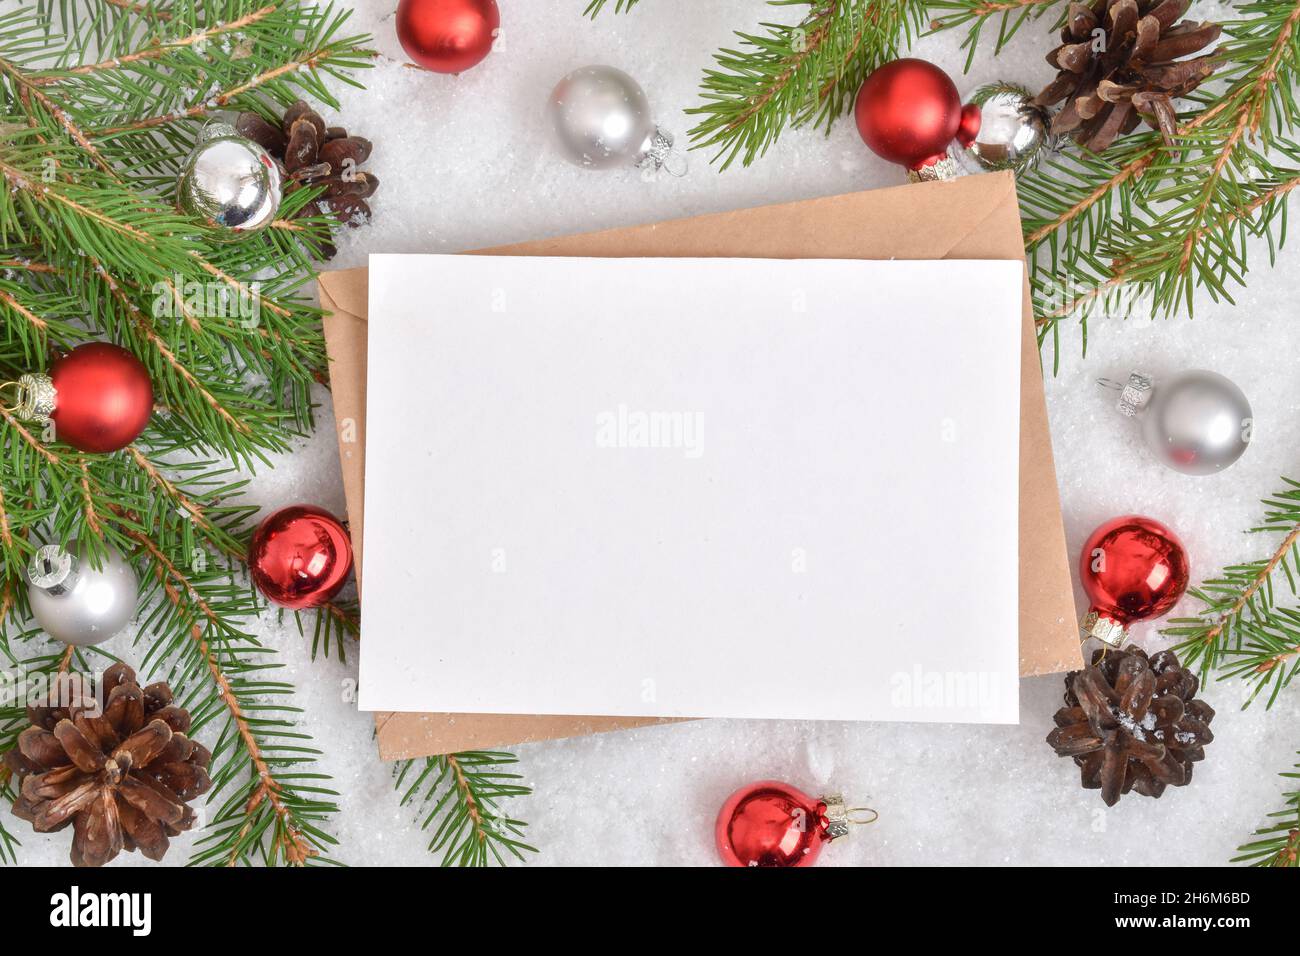 https://c8.alamy.com/comp/2H6M6BD/one-empty-card-is-lying-on-a-kraft-envelope-in-the-snow-with-a-christmas-tree-and-glass-balls-banner-invitation-postcard-flatlay-flatlay-flatlay-2H6M6BD.jpg